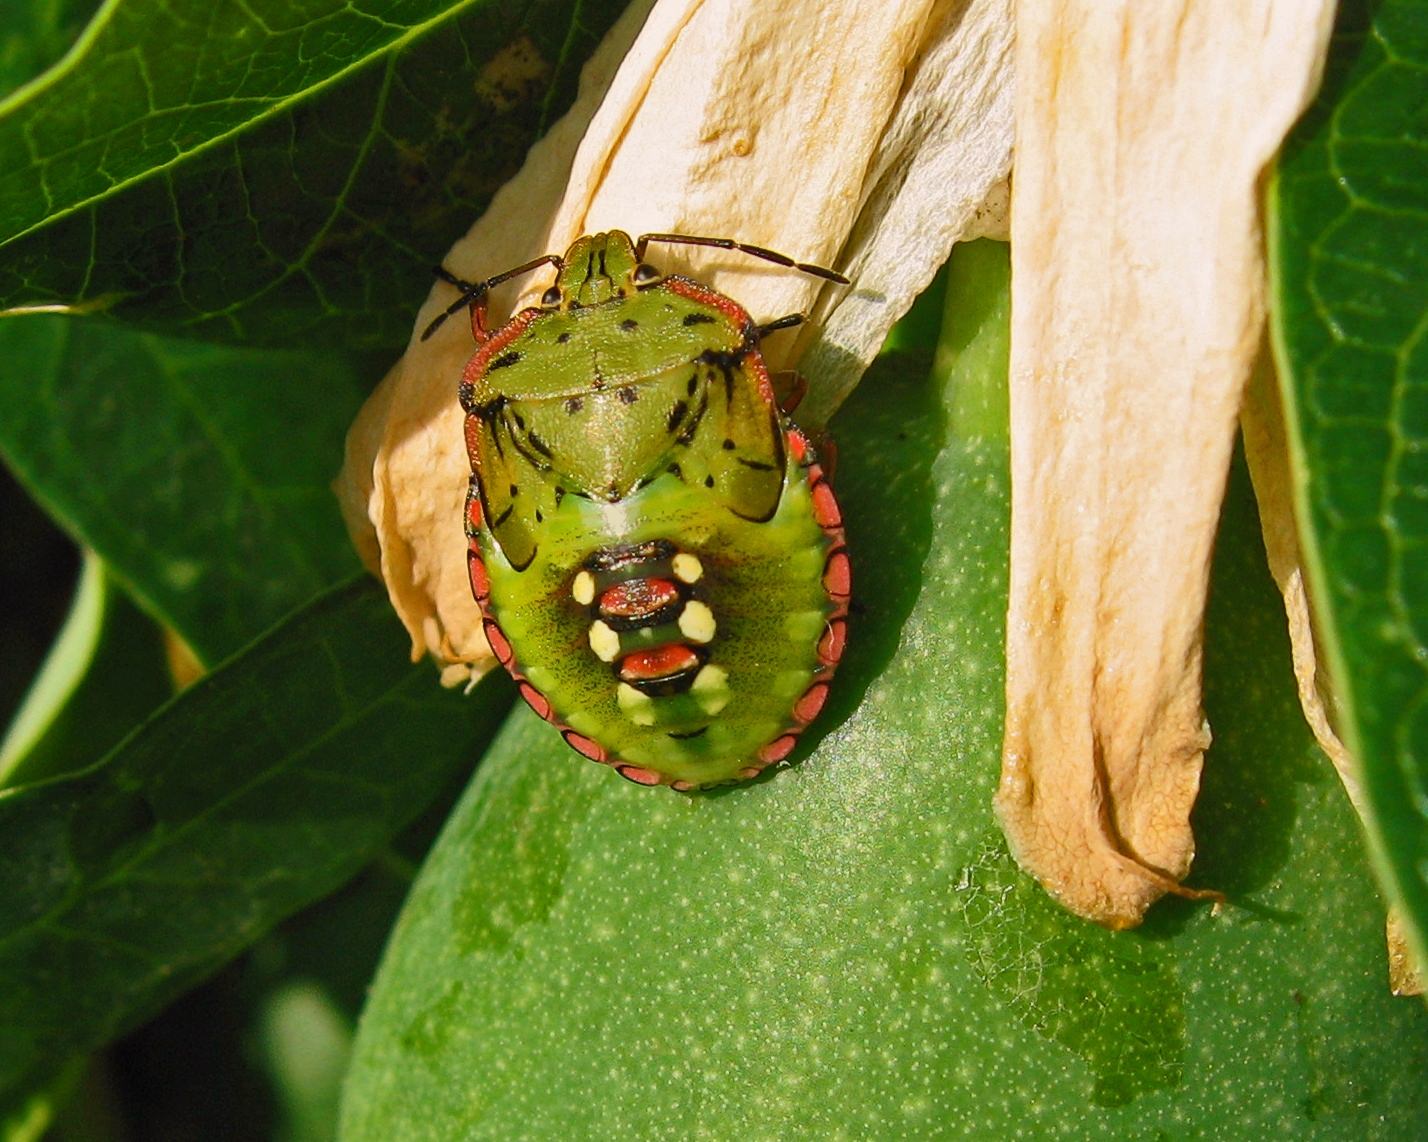 Juvenile vegetable bug on passion fruit in Croatia